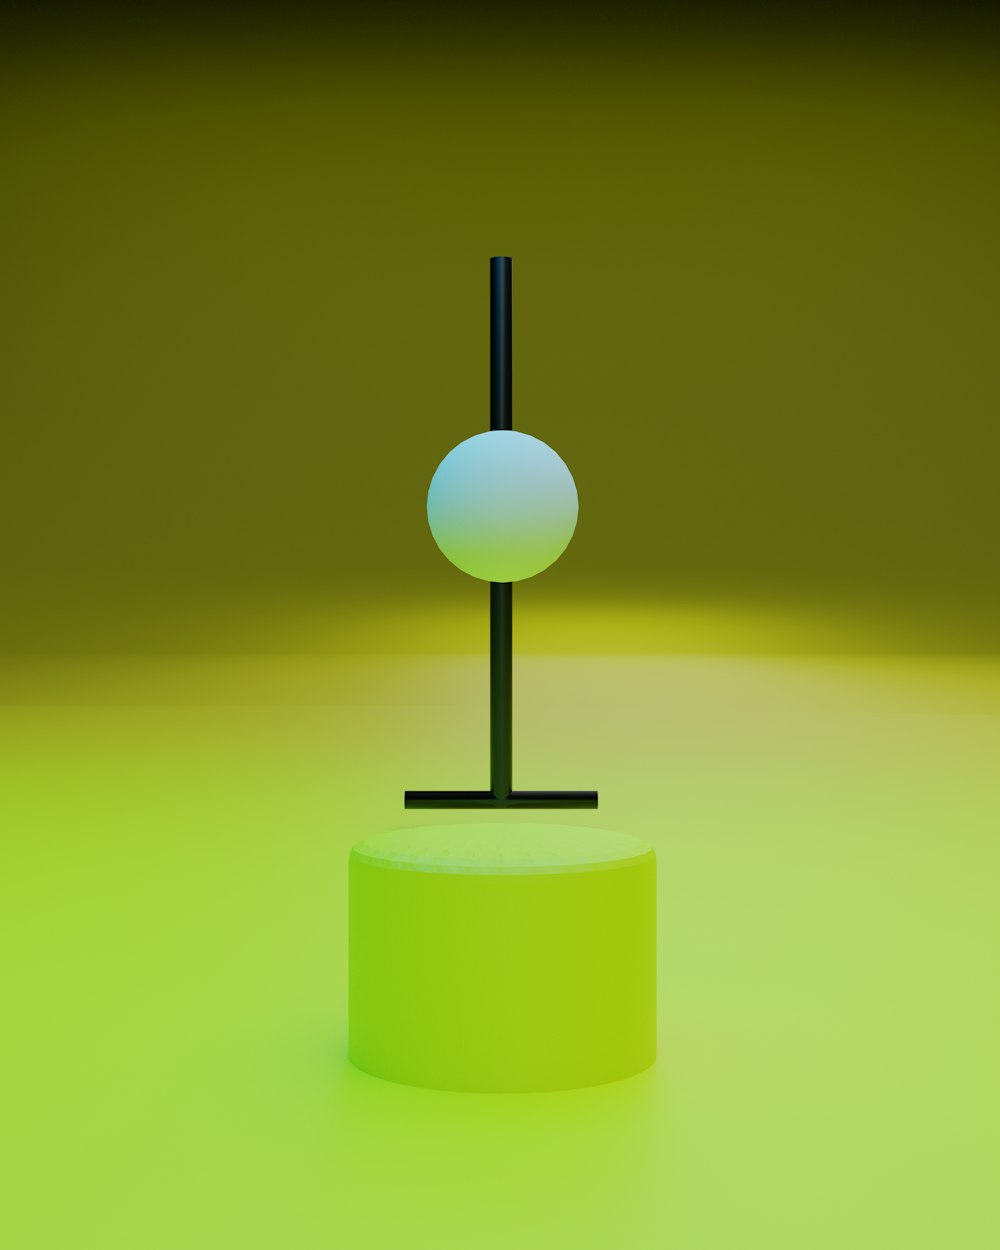 a small round object on a pedestal on a yellow background